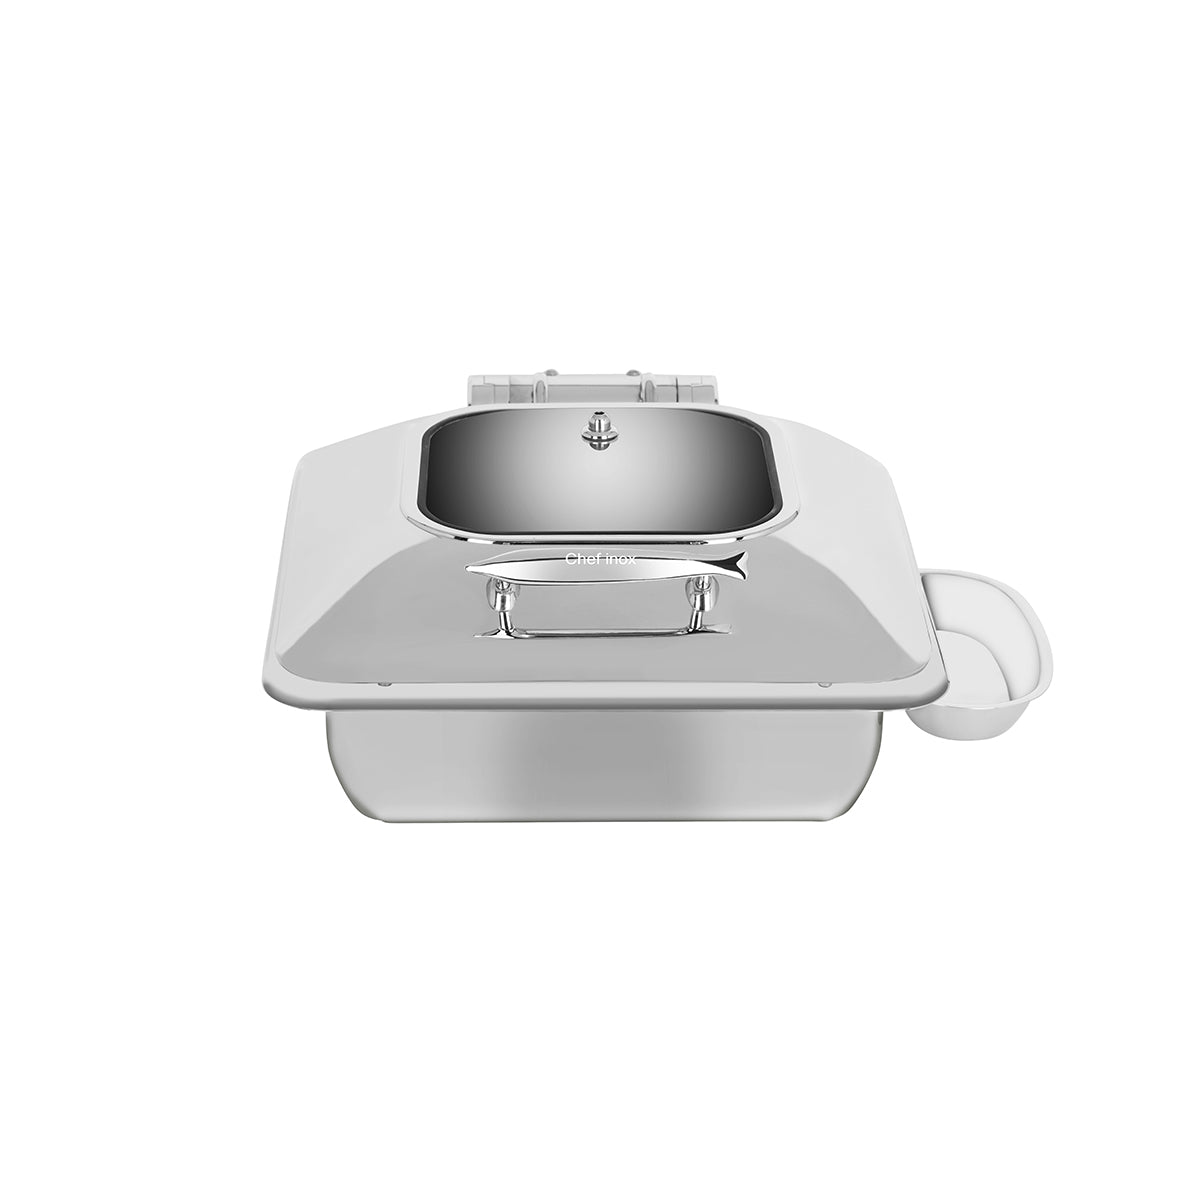 54913 Chef Inox Delux Chafer Rectangular 18/8 Stainless Steel 2/3 Size with Glass Lid Tomkin Australia Hospitality Supplies